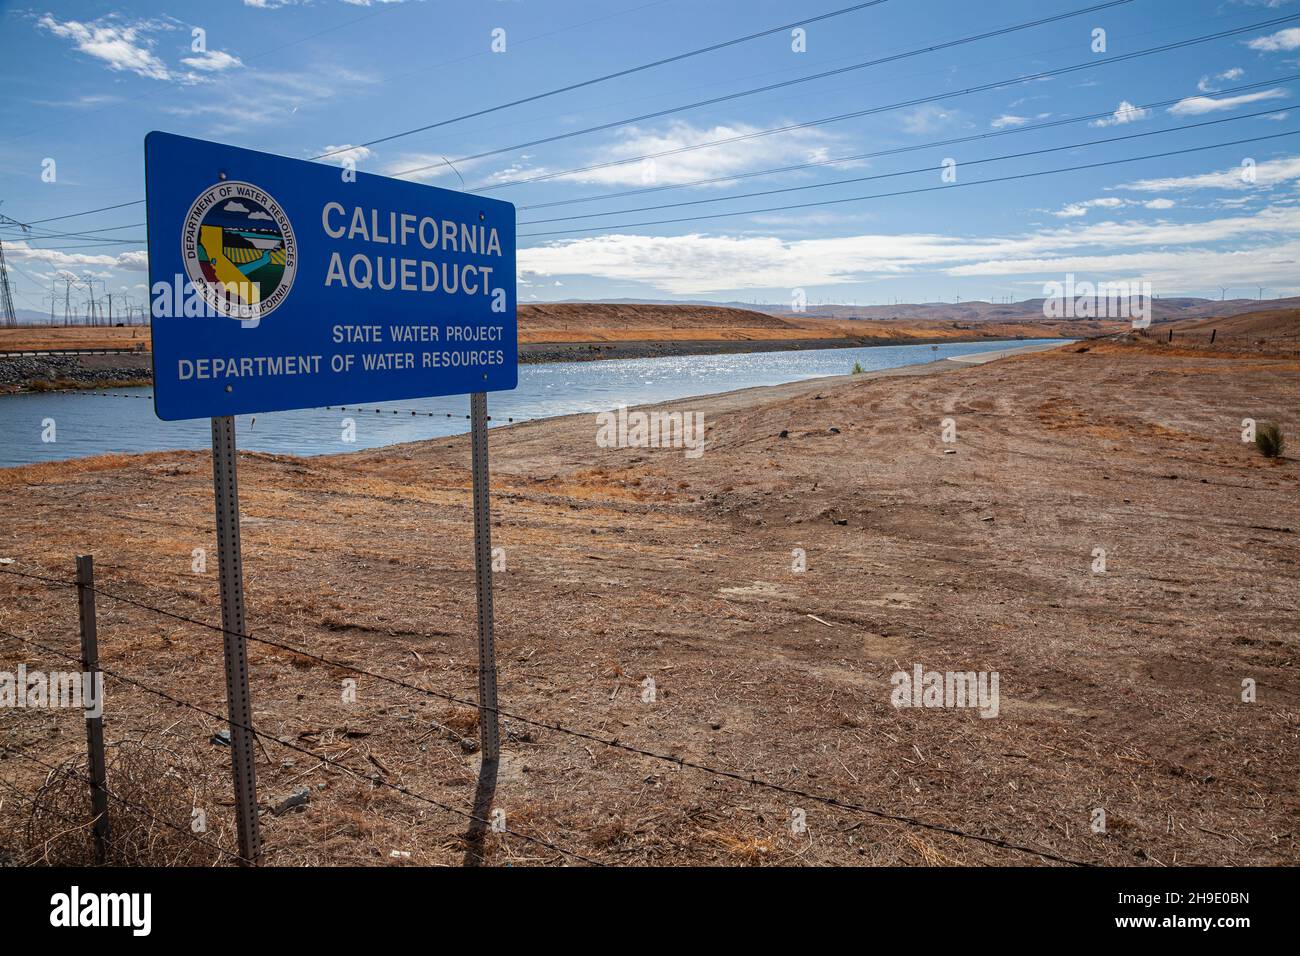 Clifton Court Forebay is a reservoir in the San Joaquin River Delta and is the intake point and start of the California Aqueduct for transport to Sout Stock Photo